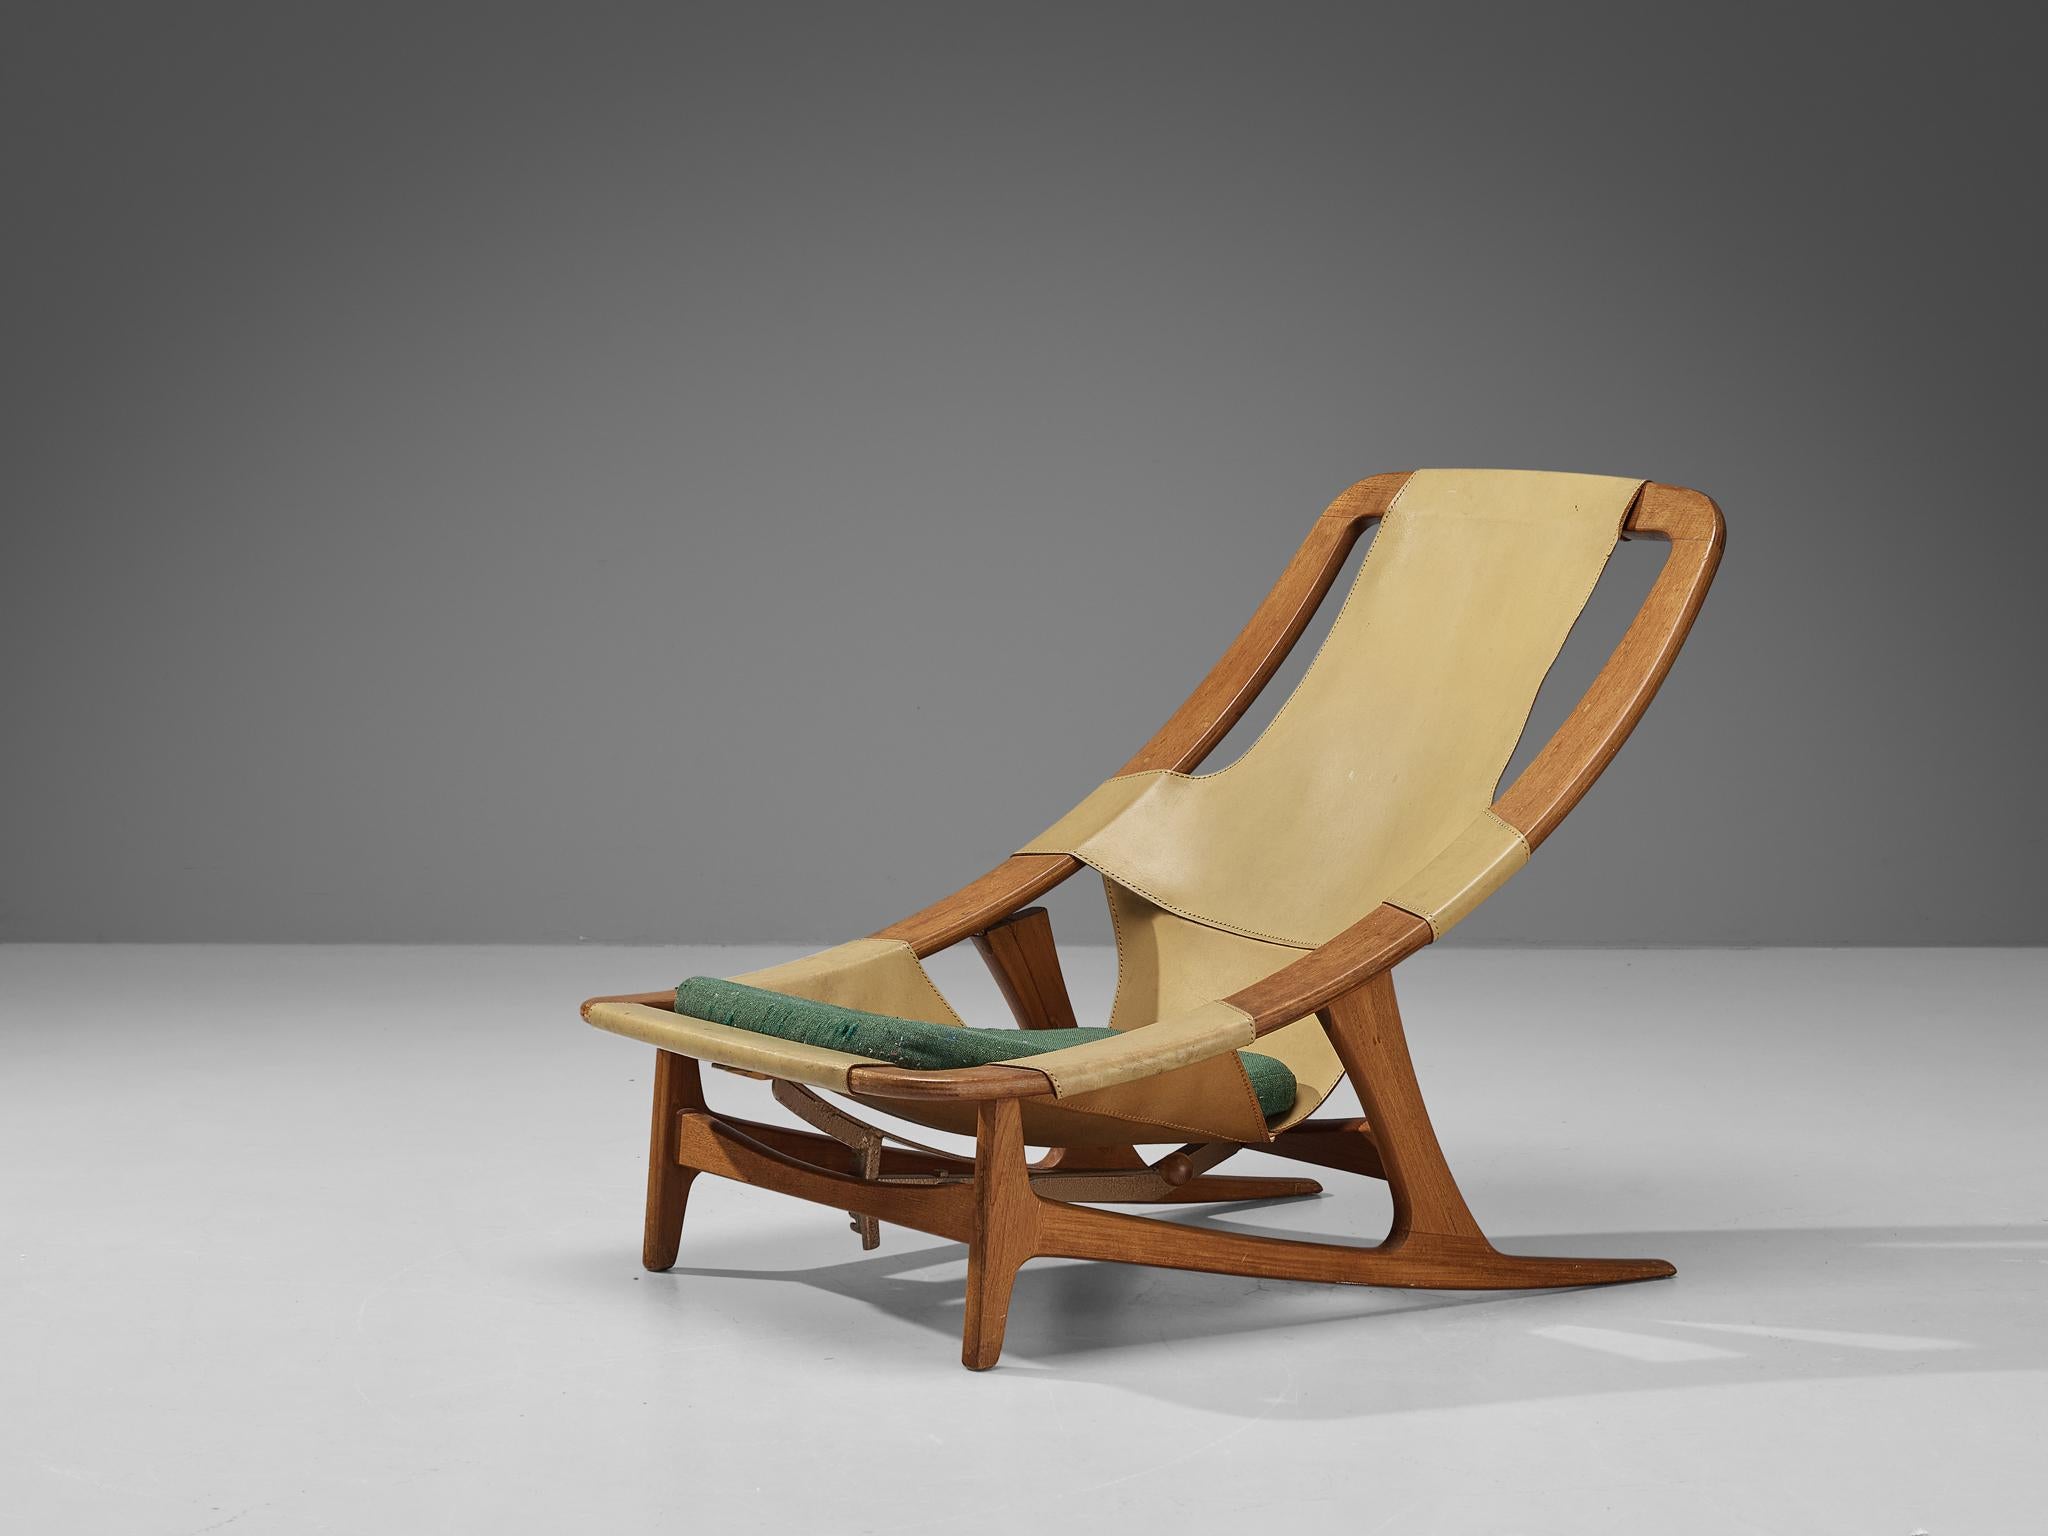 Arne F. Tidemand for Norcraft, 'Holmenkollen' lounge chair, leather, teak, Norway, 1959

This easy chair is designed by Norwegian designer Arne F. Tidemand Ruud and produced by Norwegian company Norcraft. This chair is very dynamic due its design